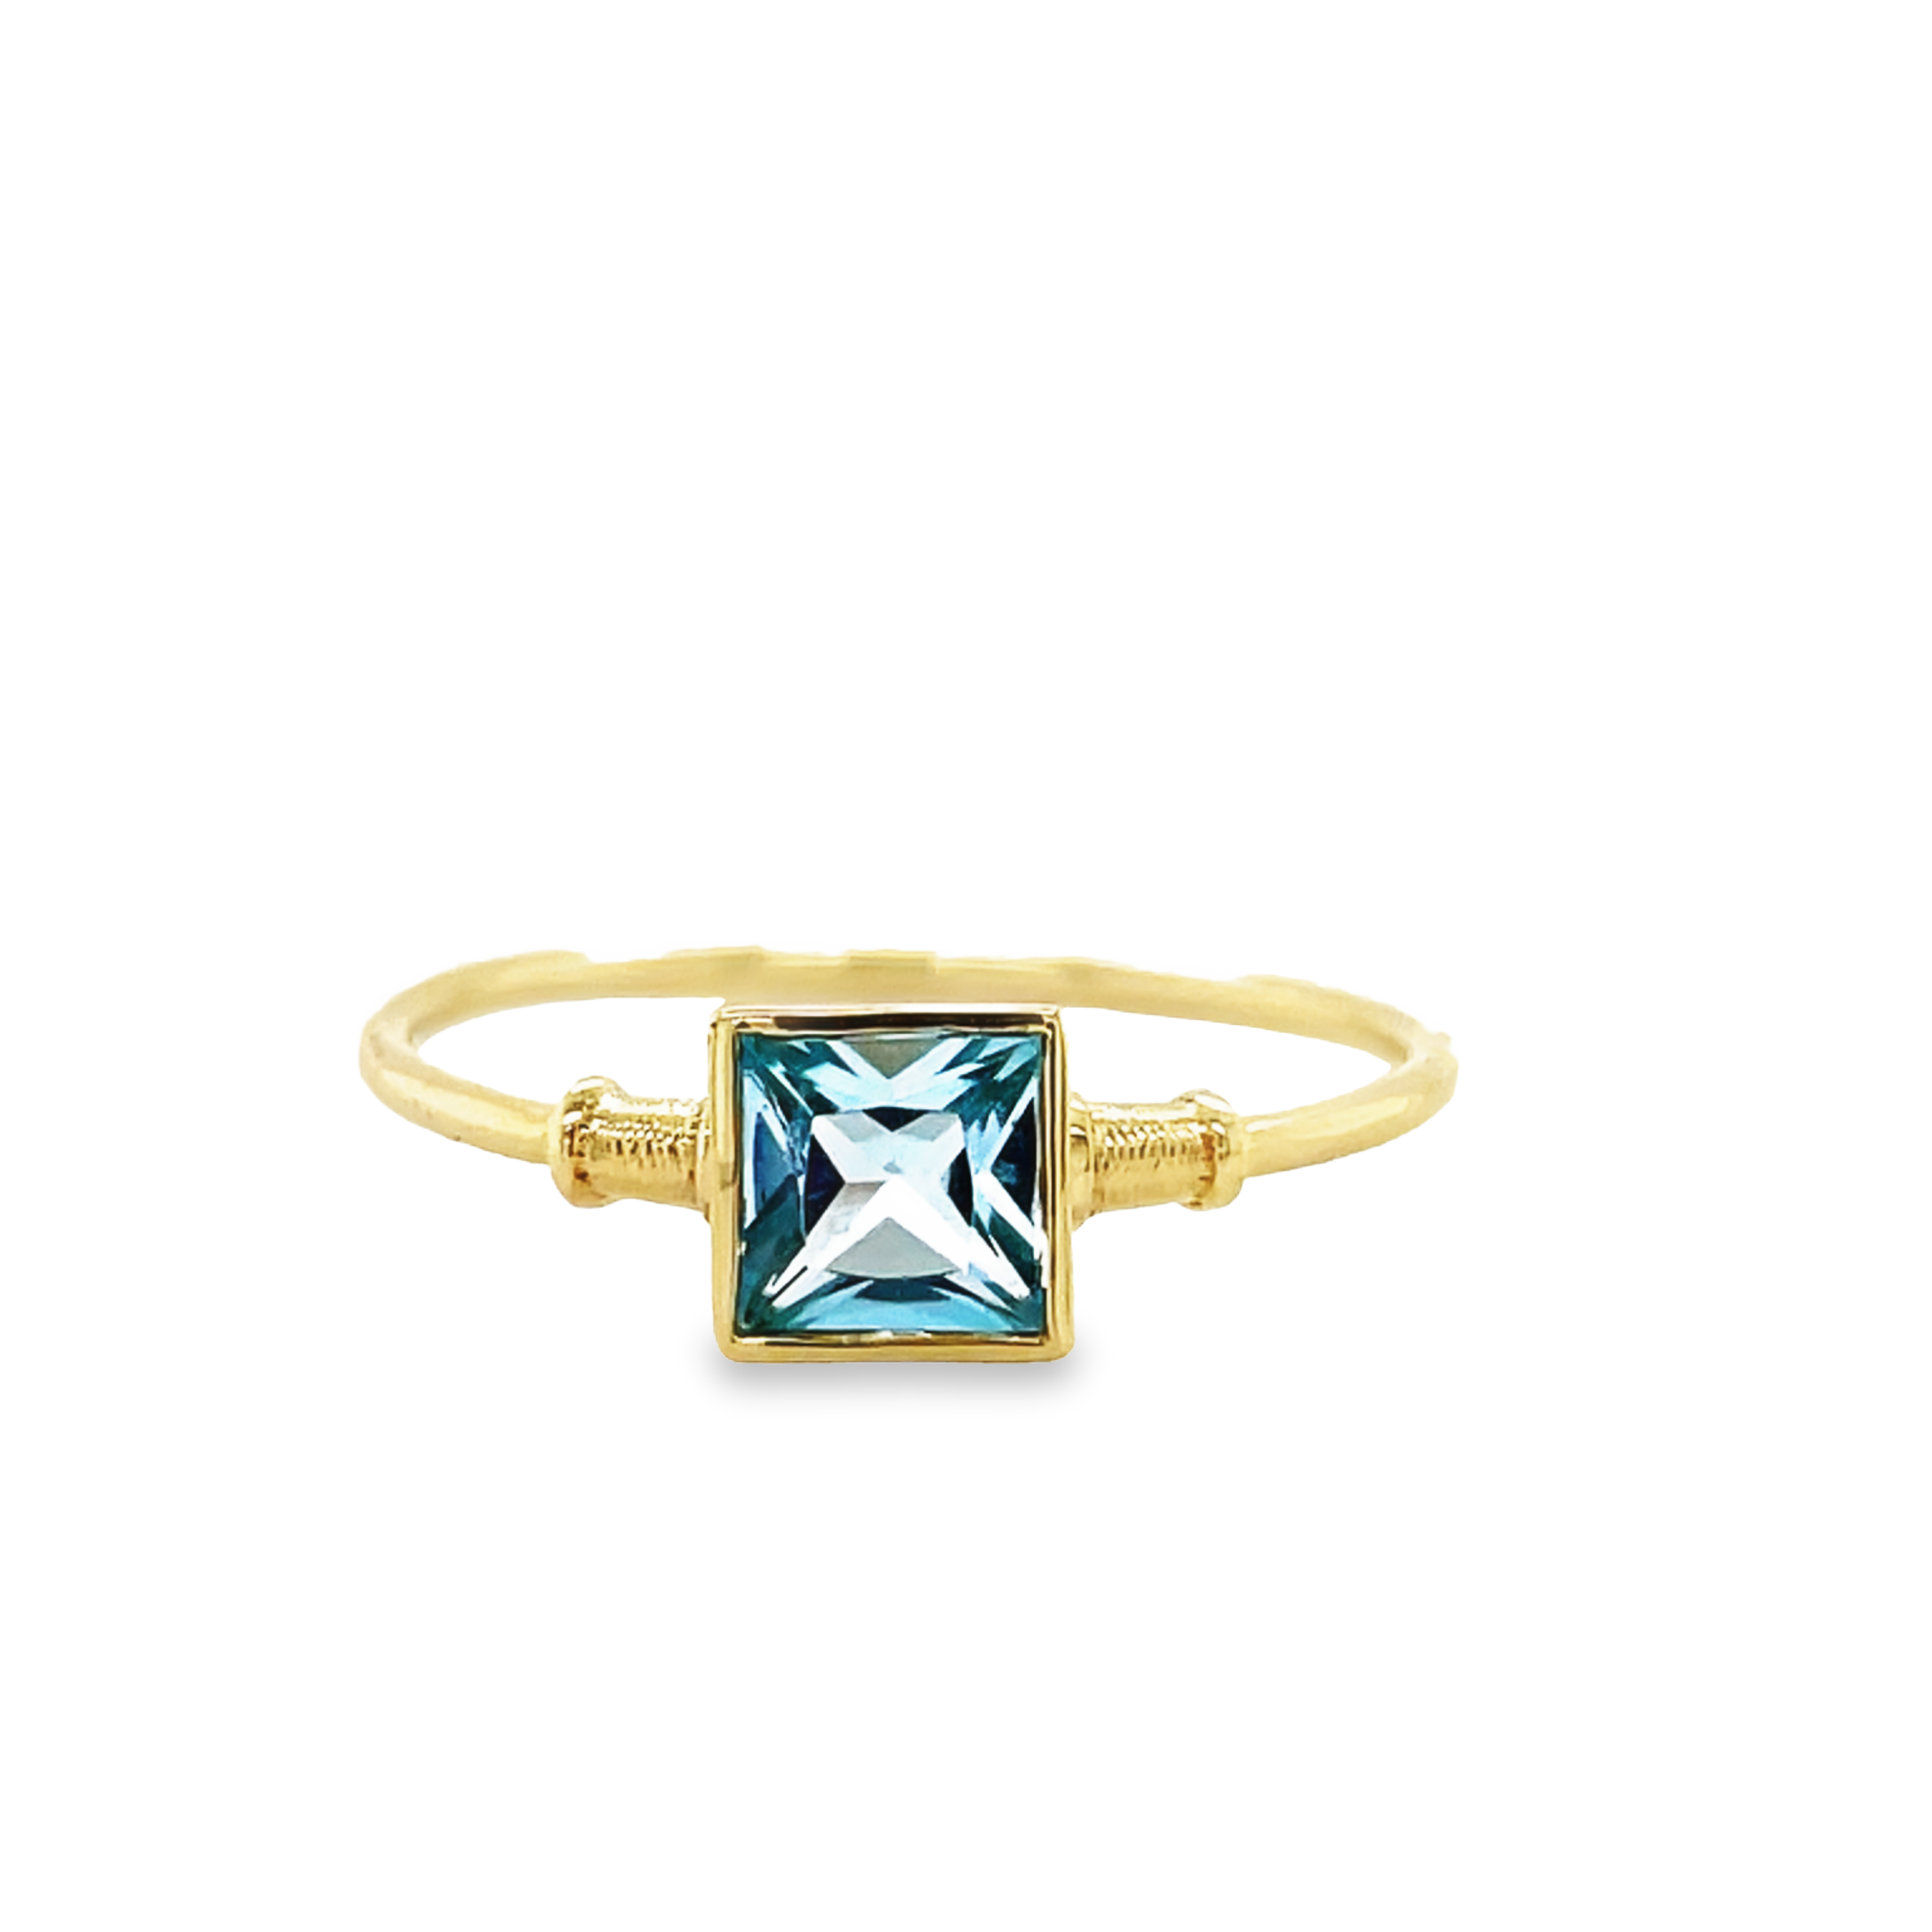 Crafted in elegant 14k yellow gold, this size 7.5 oval blue topaz ring sparkles with an impressive 7.00 mm gem. A distinctive rope style shank is the perfect finishing touch.